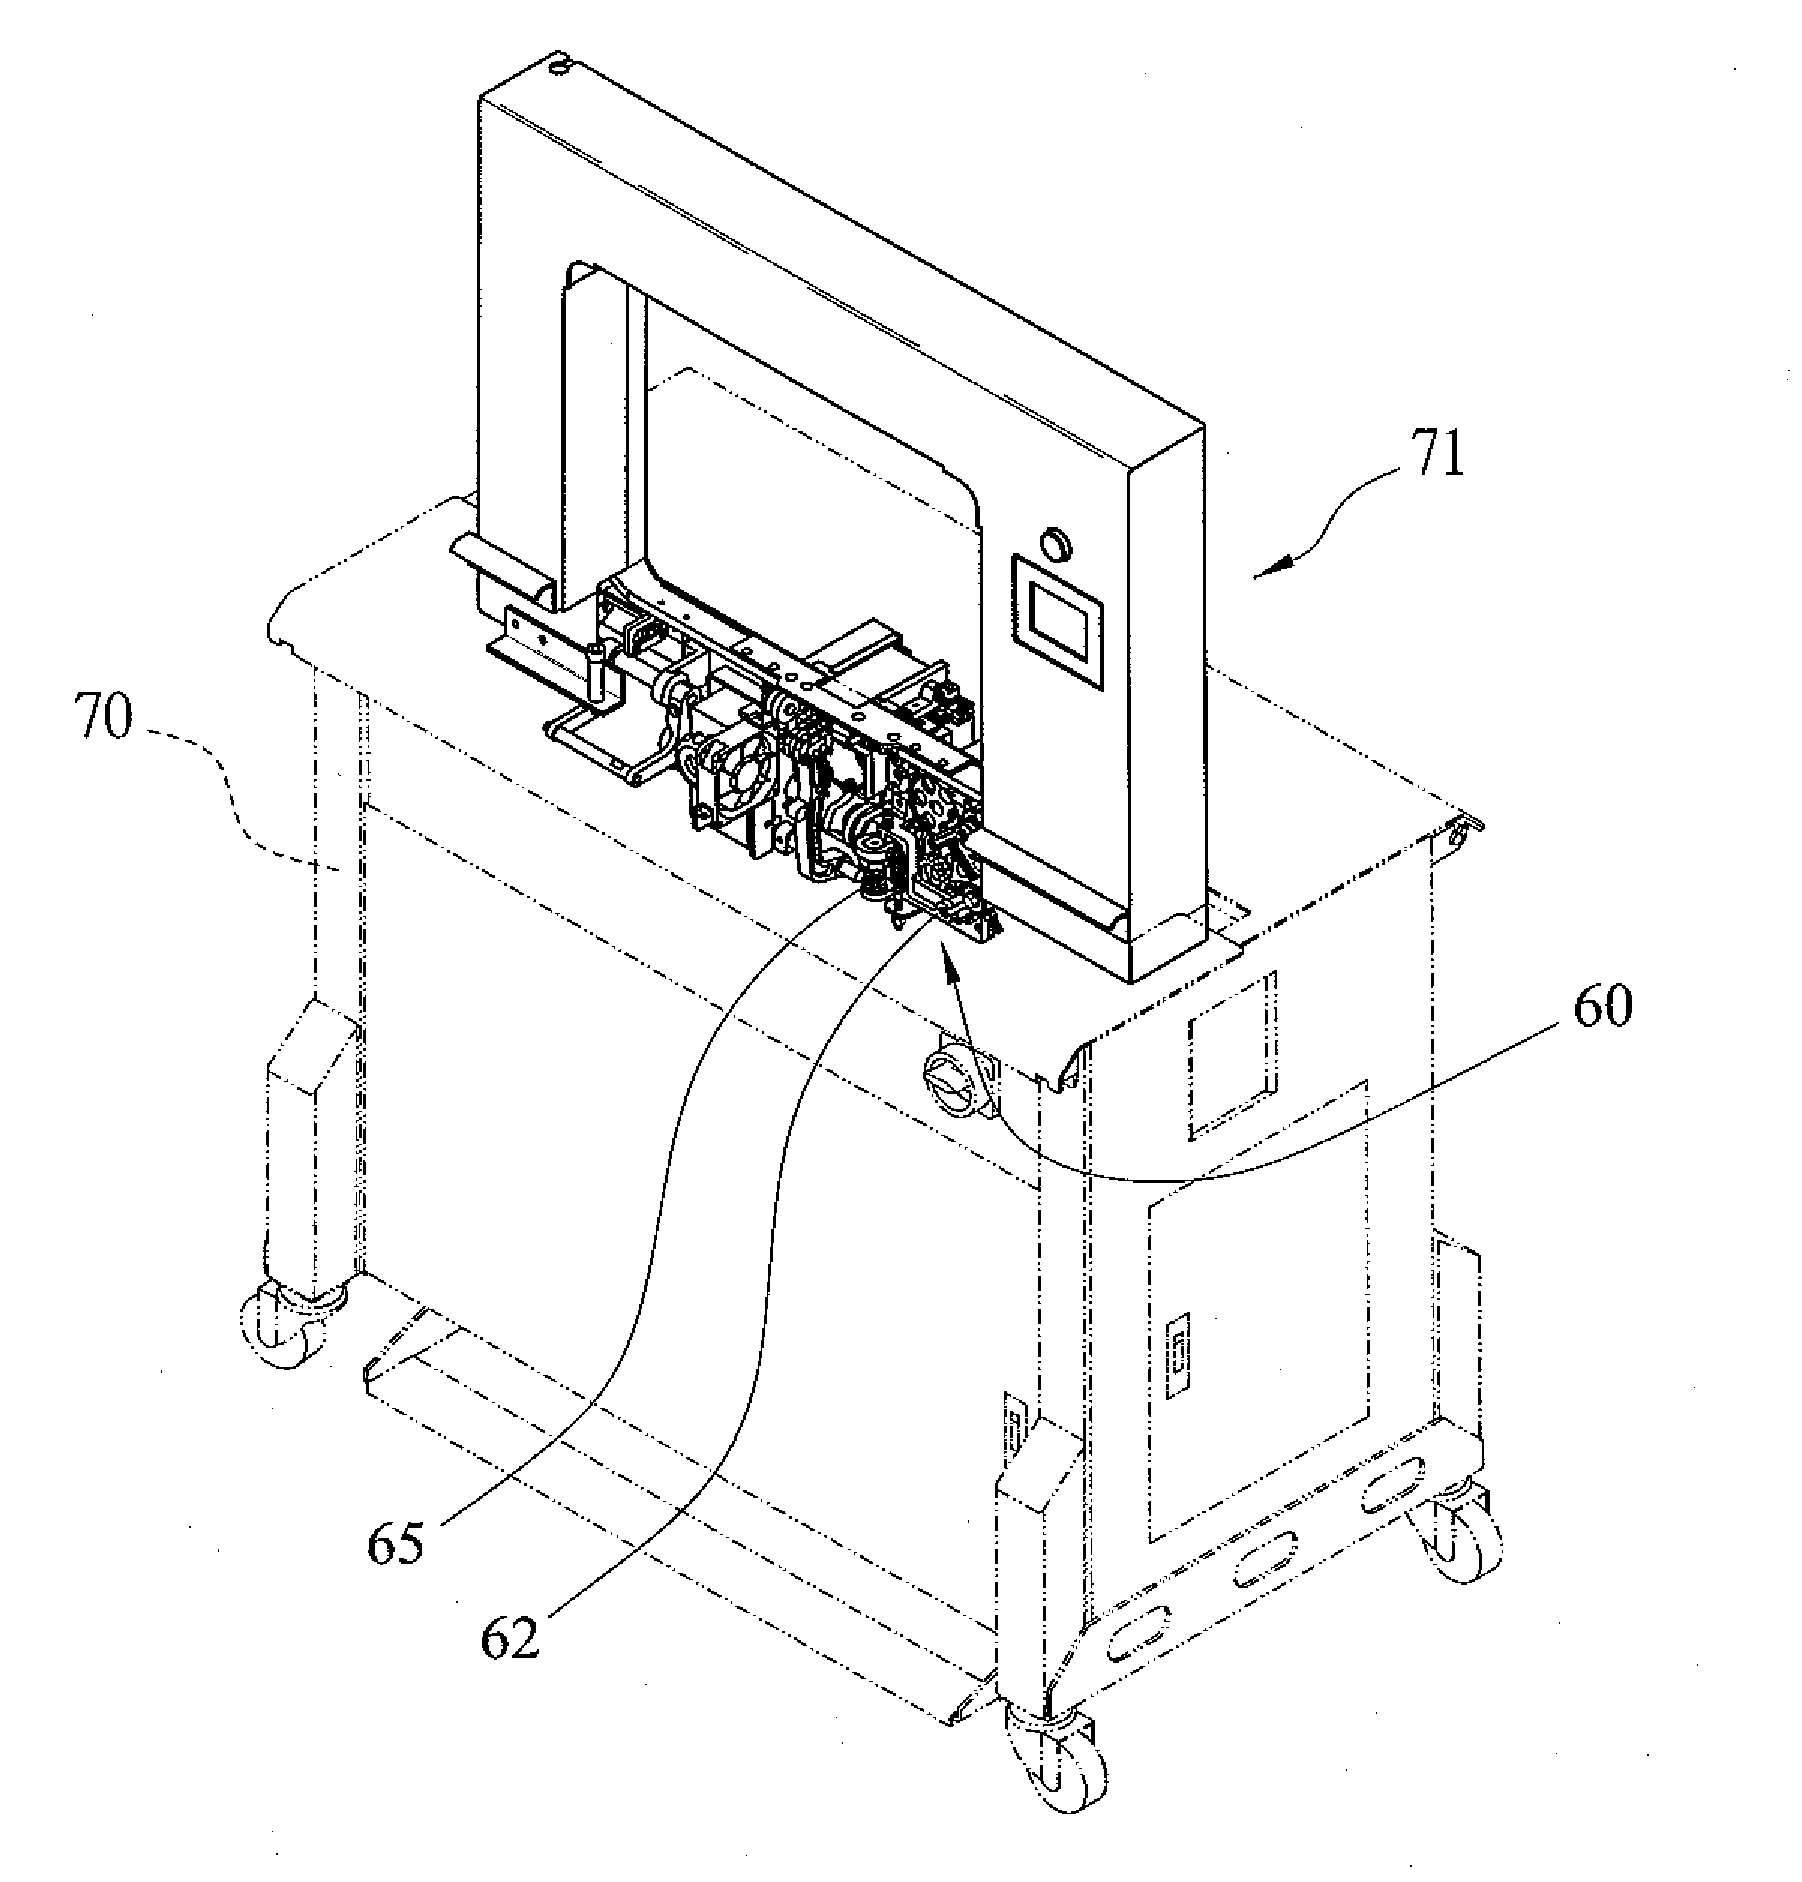 Reverse Tension Mechanism for a Strapping Machine